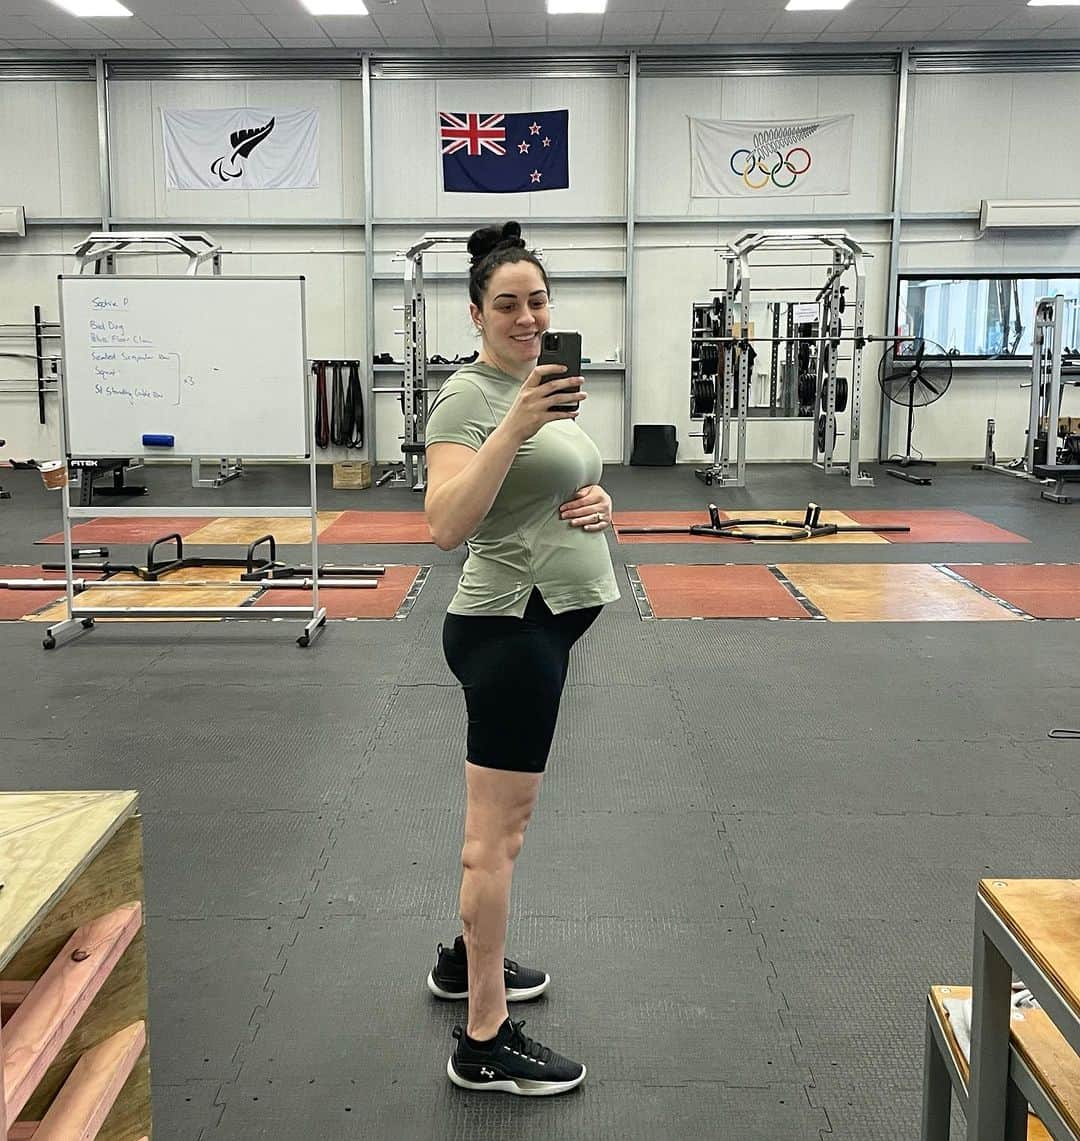 Sophie Pascoeのインスタグラム：「Been loving being back in the gym and having some routine in my weeks again after a long few months of sickness (which is still on and off daily) but managing! 🙌🏼  It’s certainly a new look and feel with my changing body, including changes in my programme at the gym to suit where I’m at. However achieving daily goals is a rewarding feeling for both baby and myself!   Big Thankyou to my Team for being so supportive! 🤍   #pregnant #paralympic #swimming #athlete」